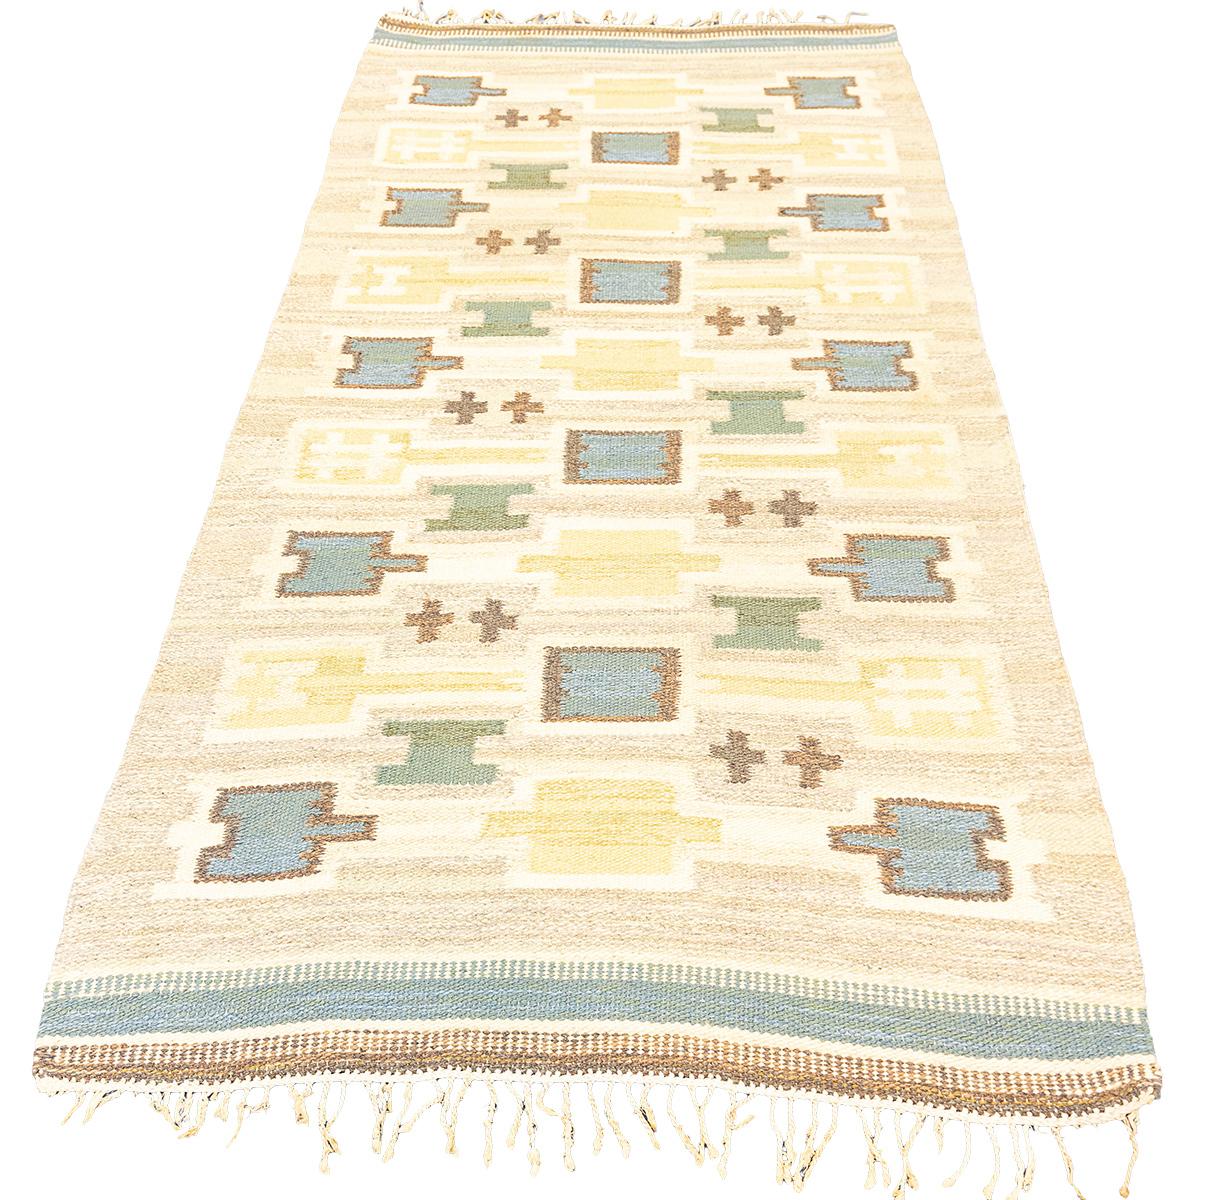 This is a Vintage Scandinavian Rollakan Swedish Rug with a cross motif design contrasting very will with Soft Beige, Blue, and Gold colors. This flat-weave rug is a true masterpiece, embodying a unique blend of elements that make it both special and